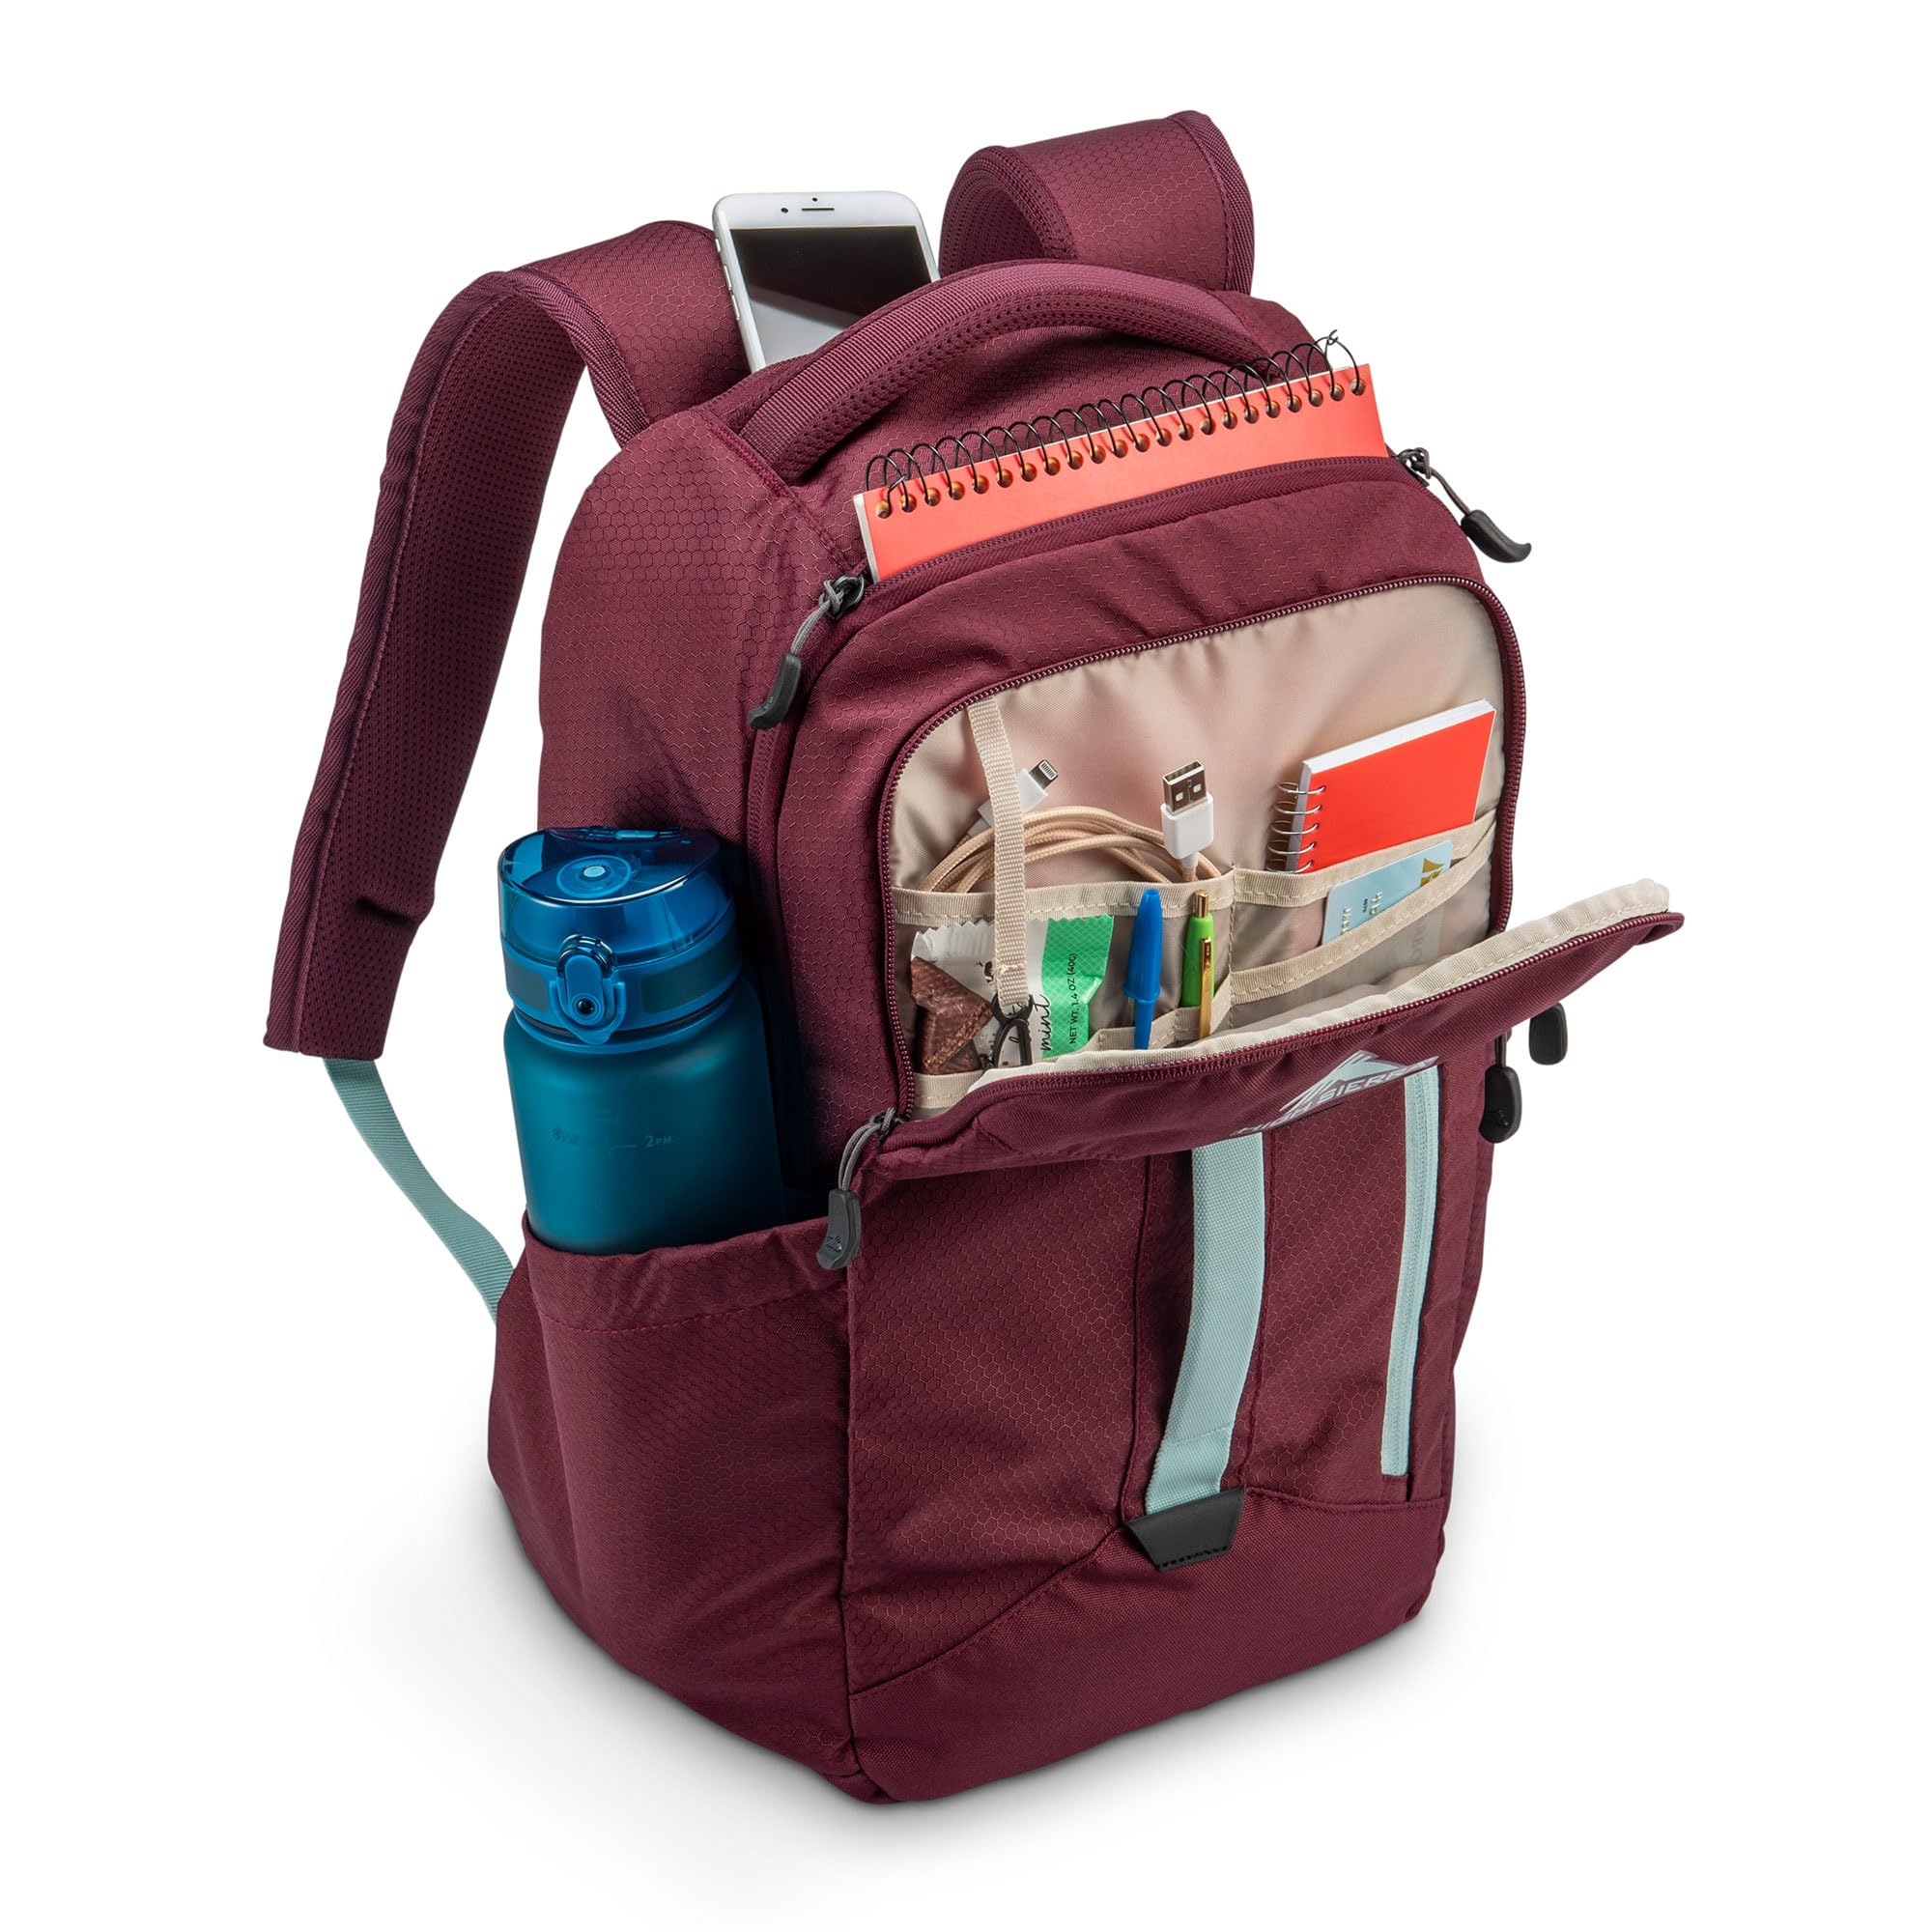 High Sierra Everyday Backpack with Device Sleeve and Adjustable Straps, Maroon